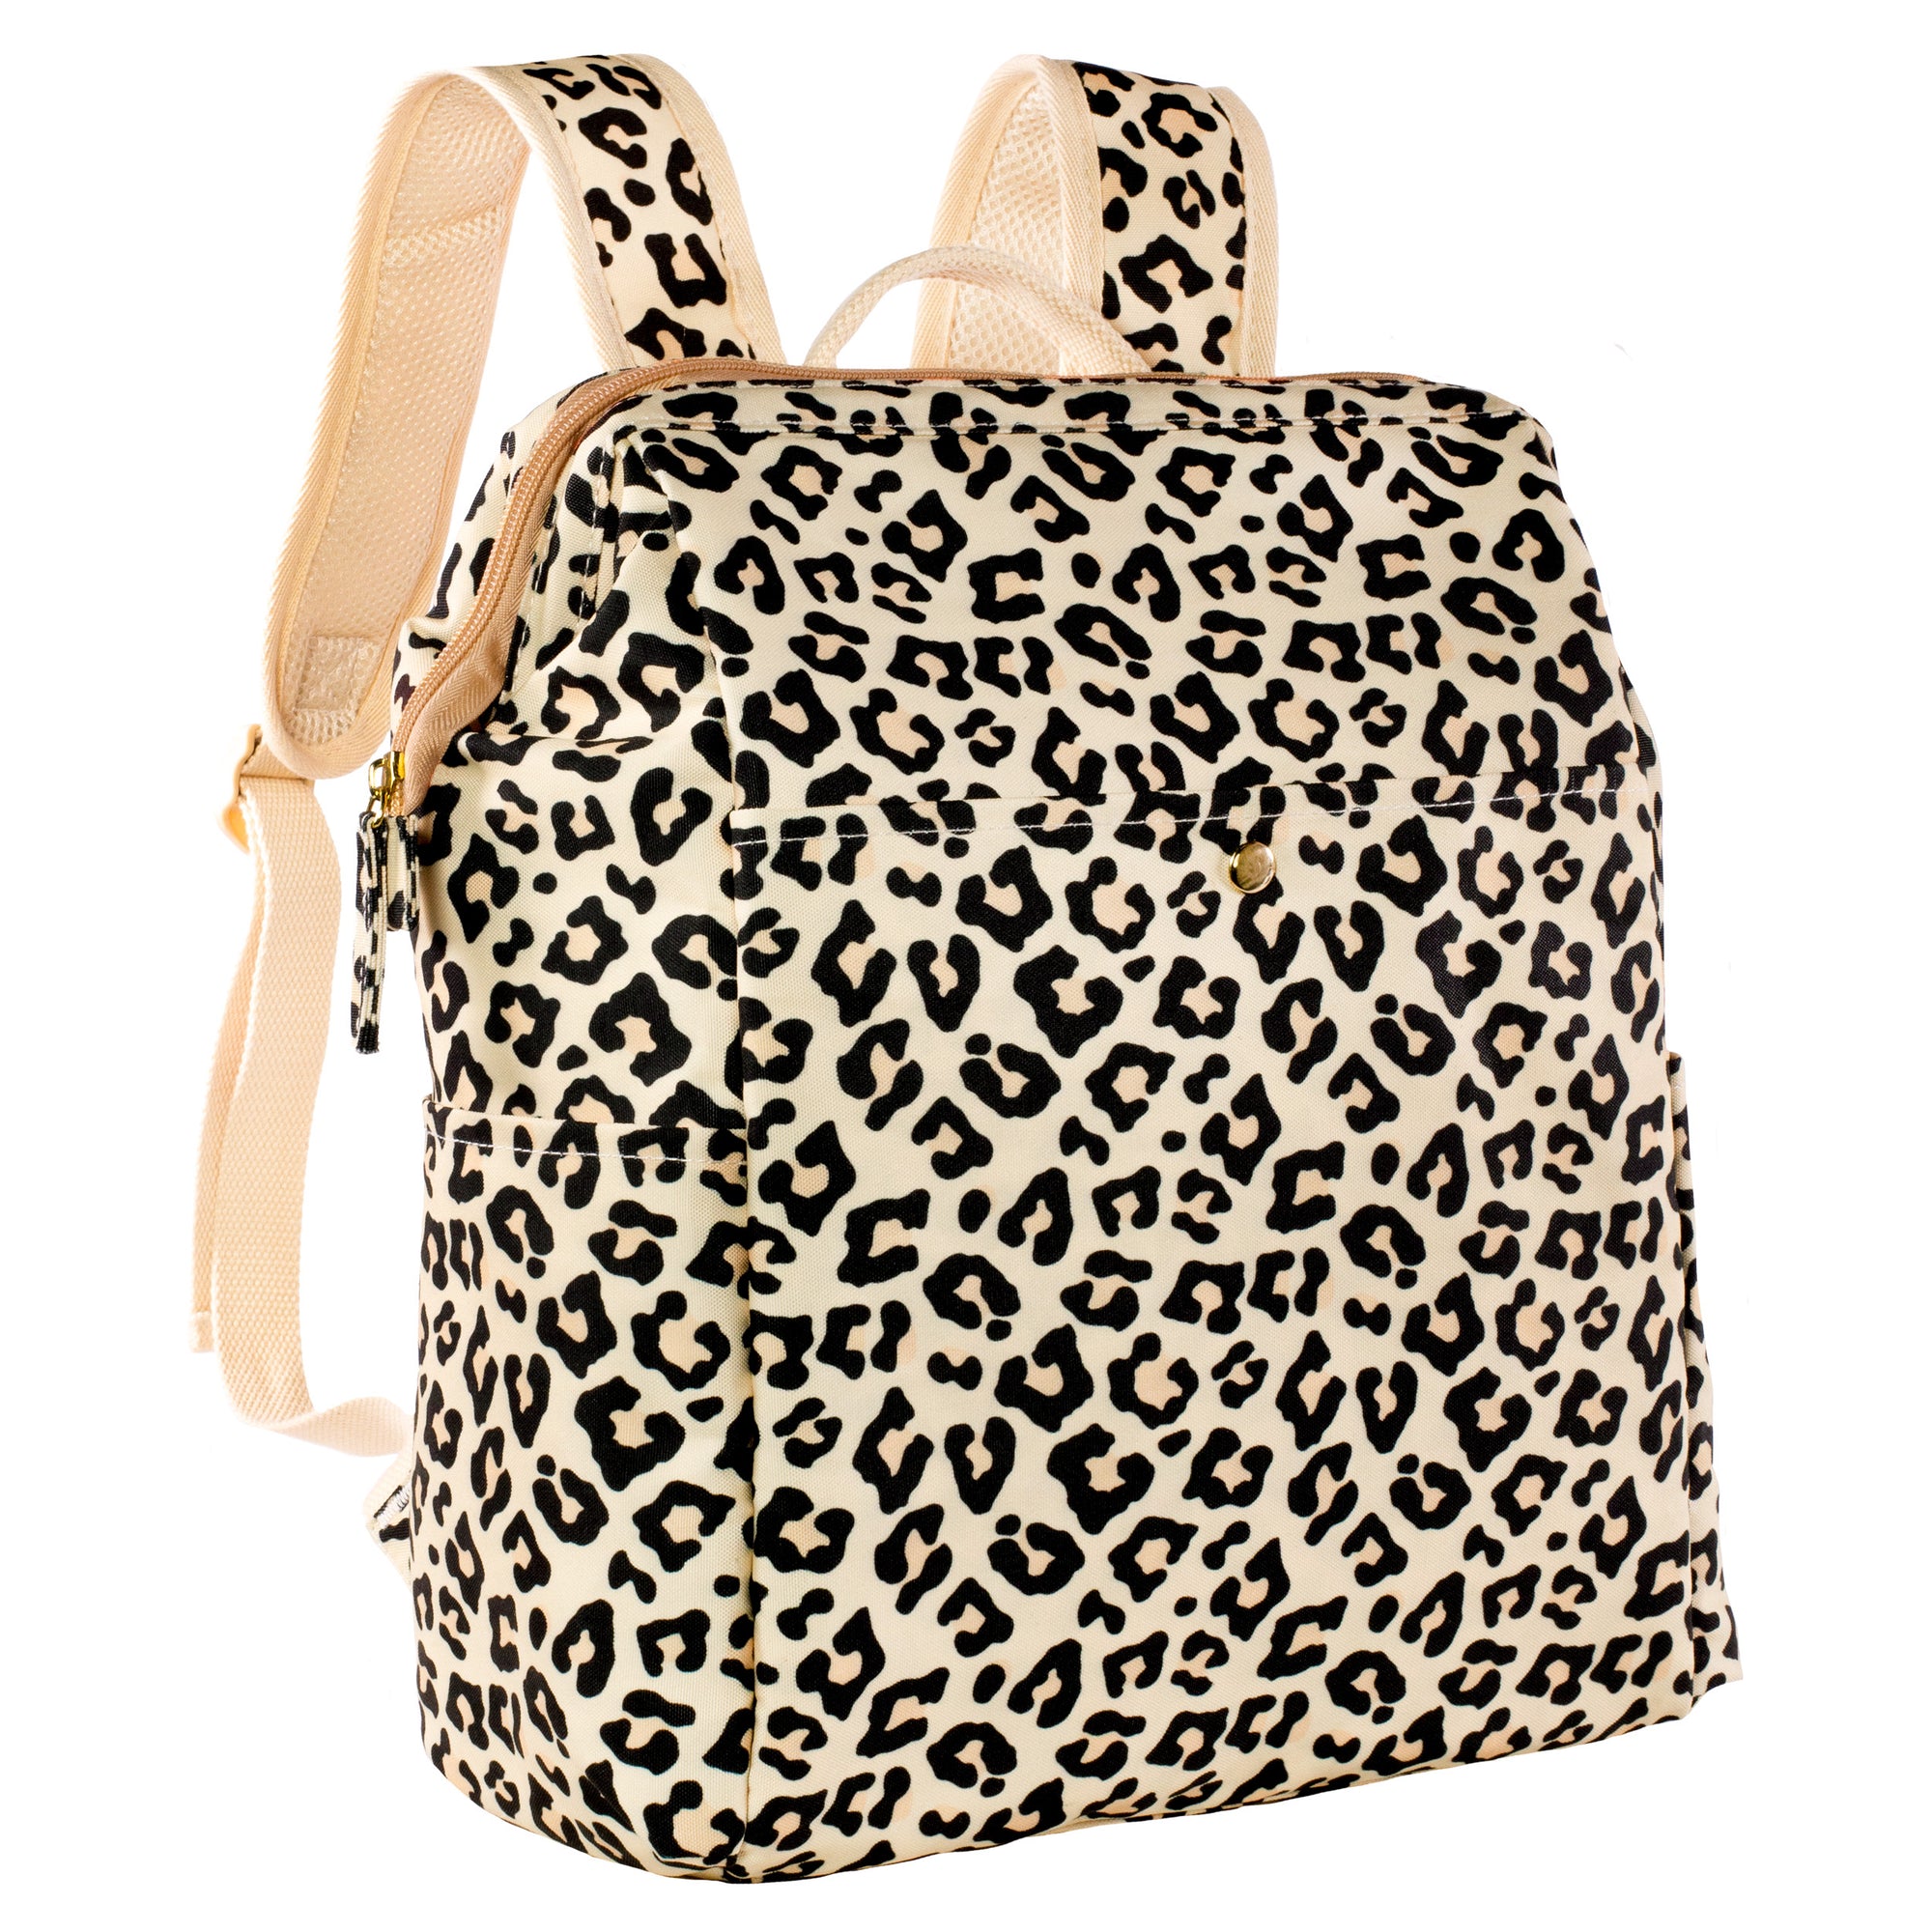 leopard print backpack cooler with insulated interior lining for picnics, hiking, and beach days